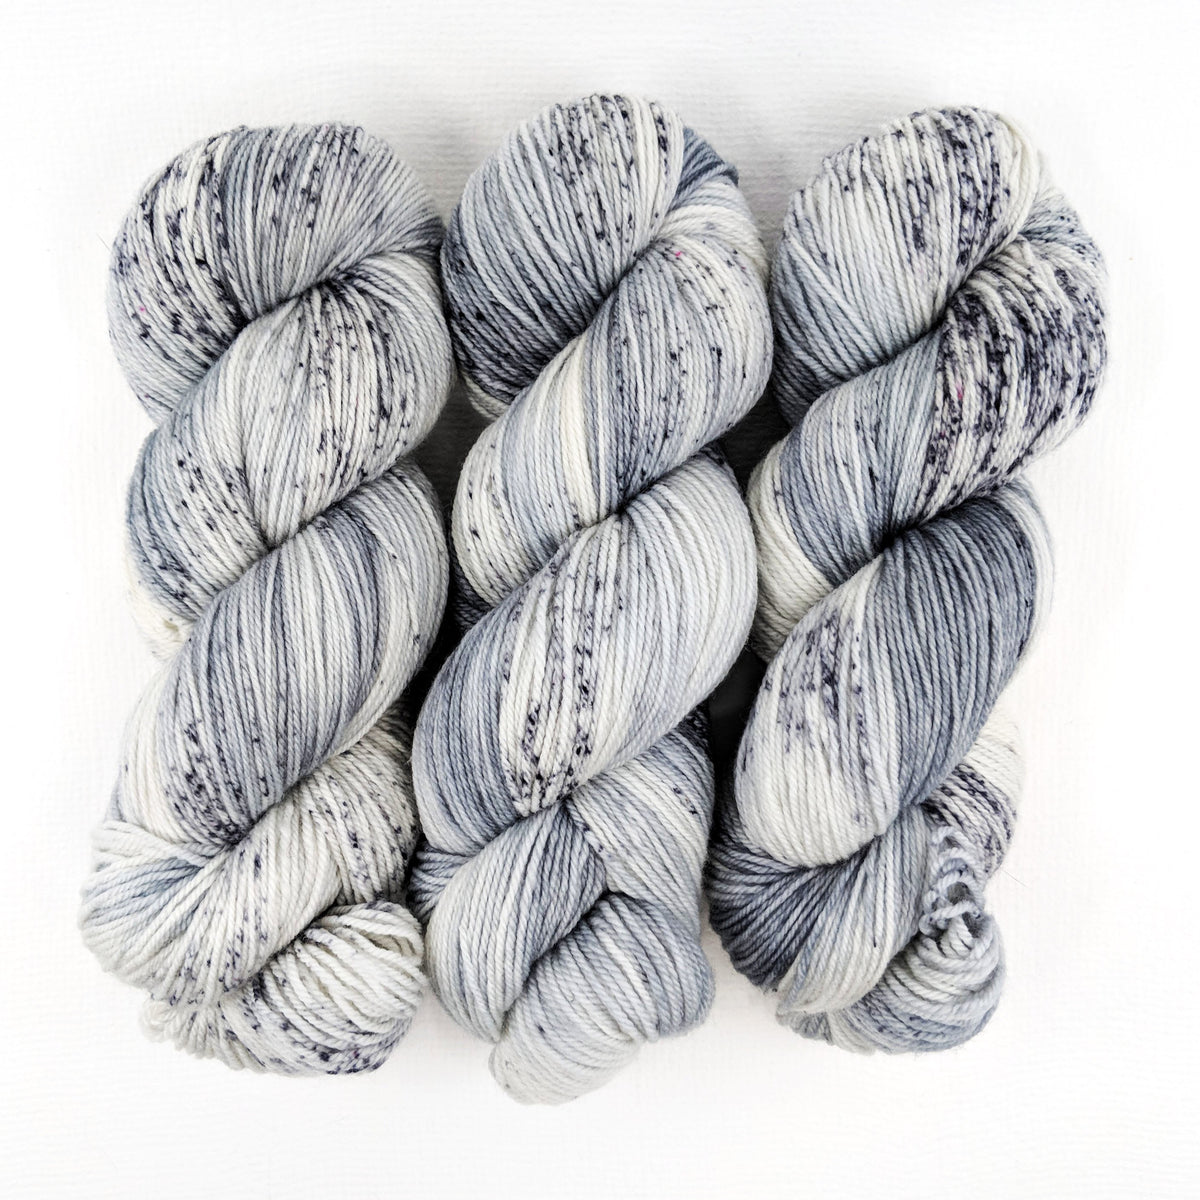 River Rock - Revival Worsted - Dyed Stock